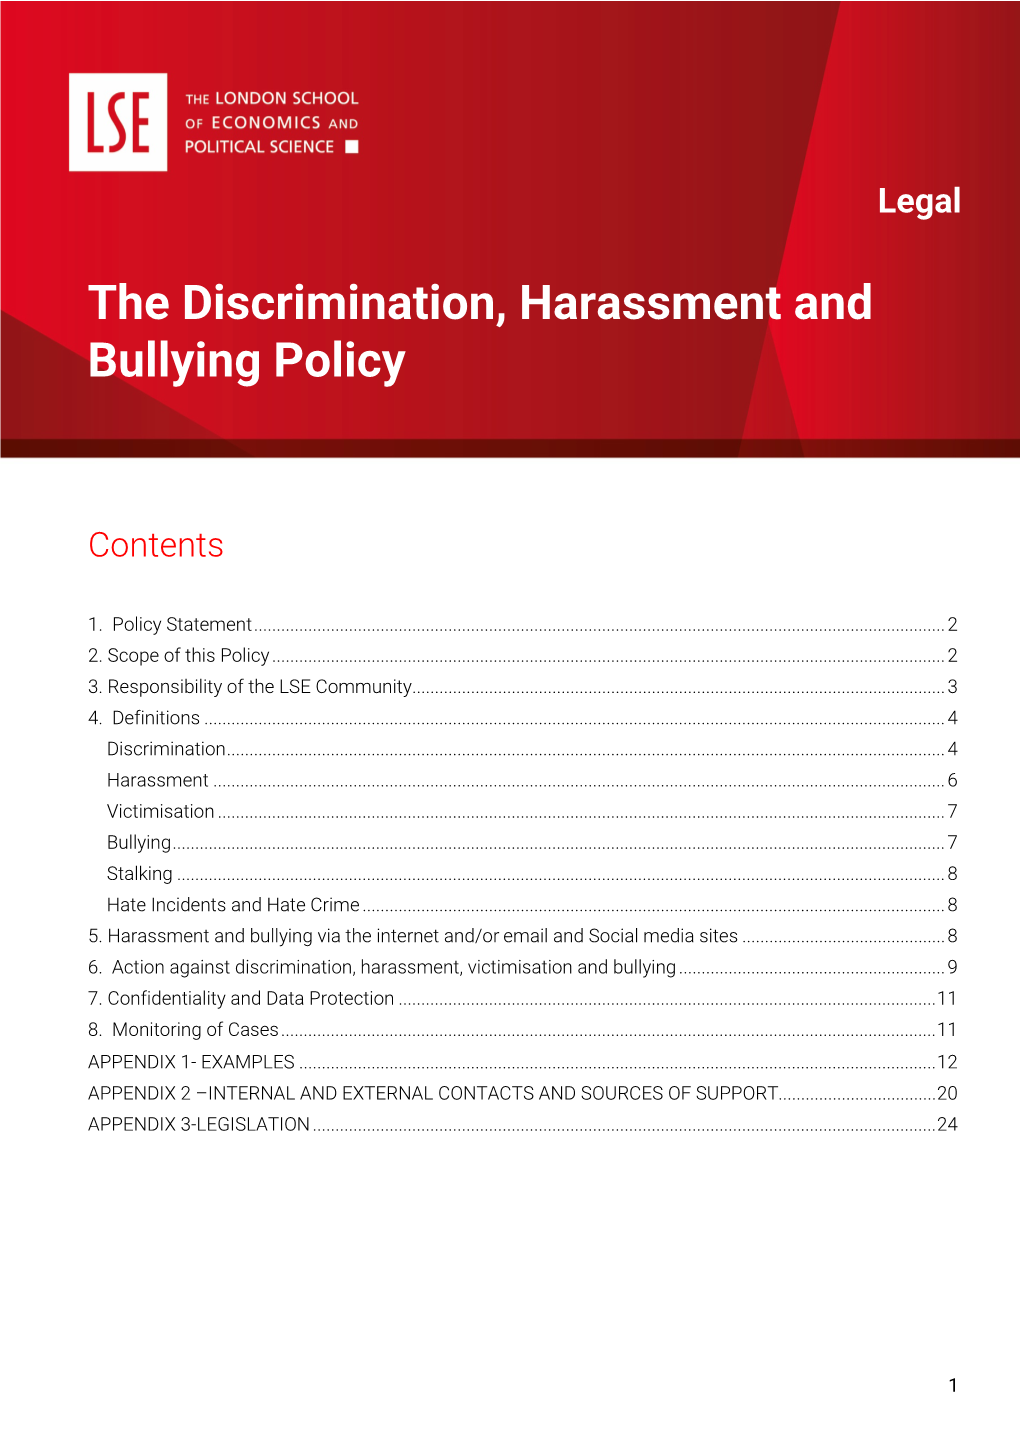 The Discrimination, Harassment and Bullying Policy